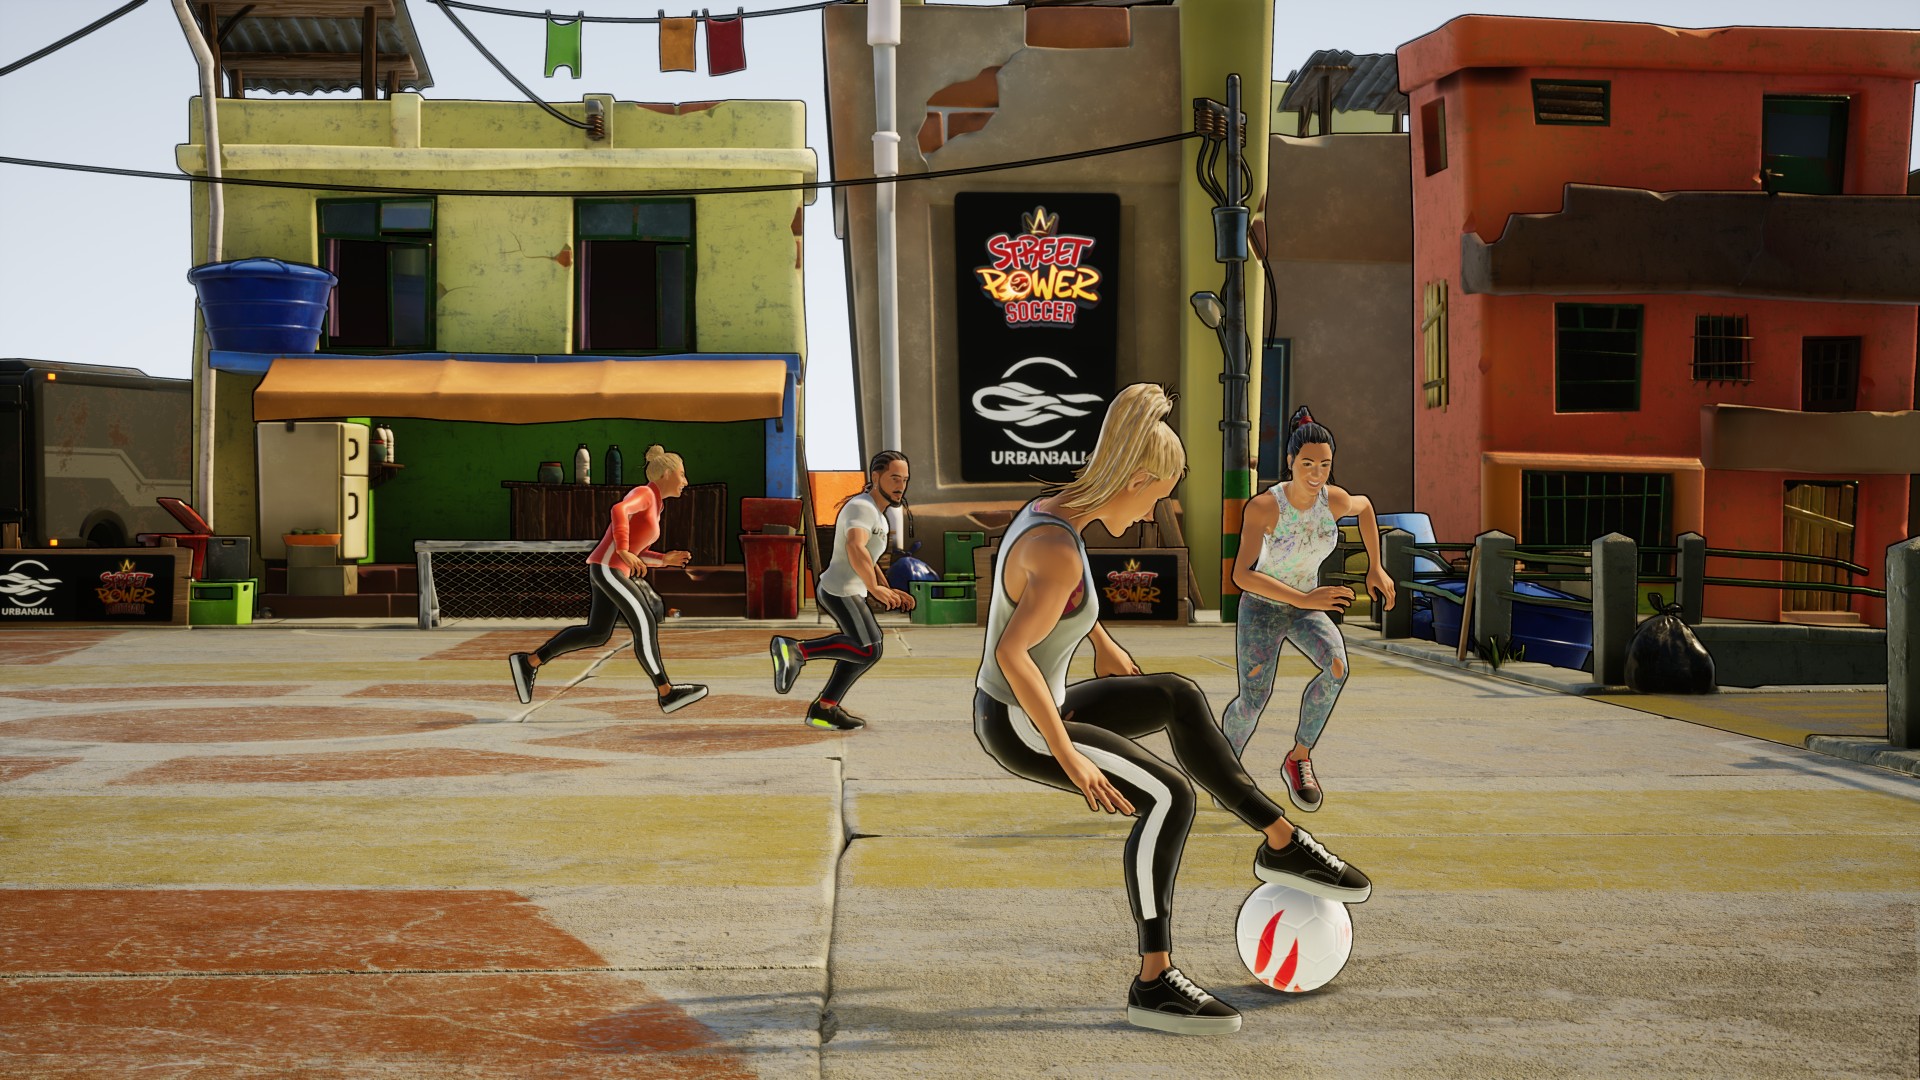 Street Power Soccer Is Bringing Over The Top Style And Arcade Action To Xbox One This Year Xbox Wire